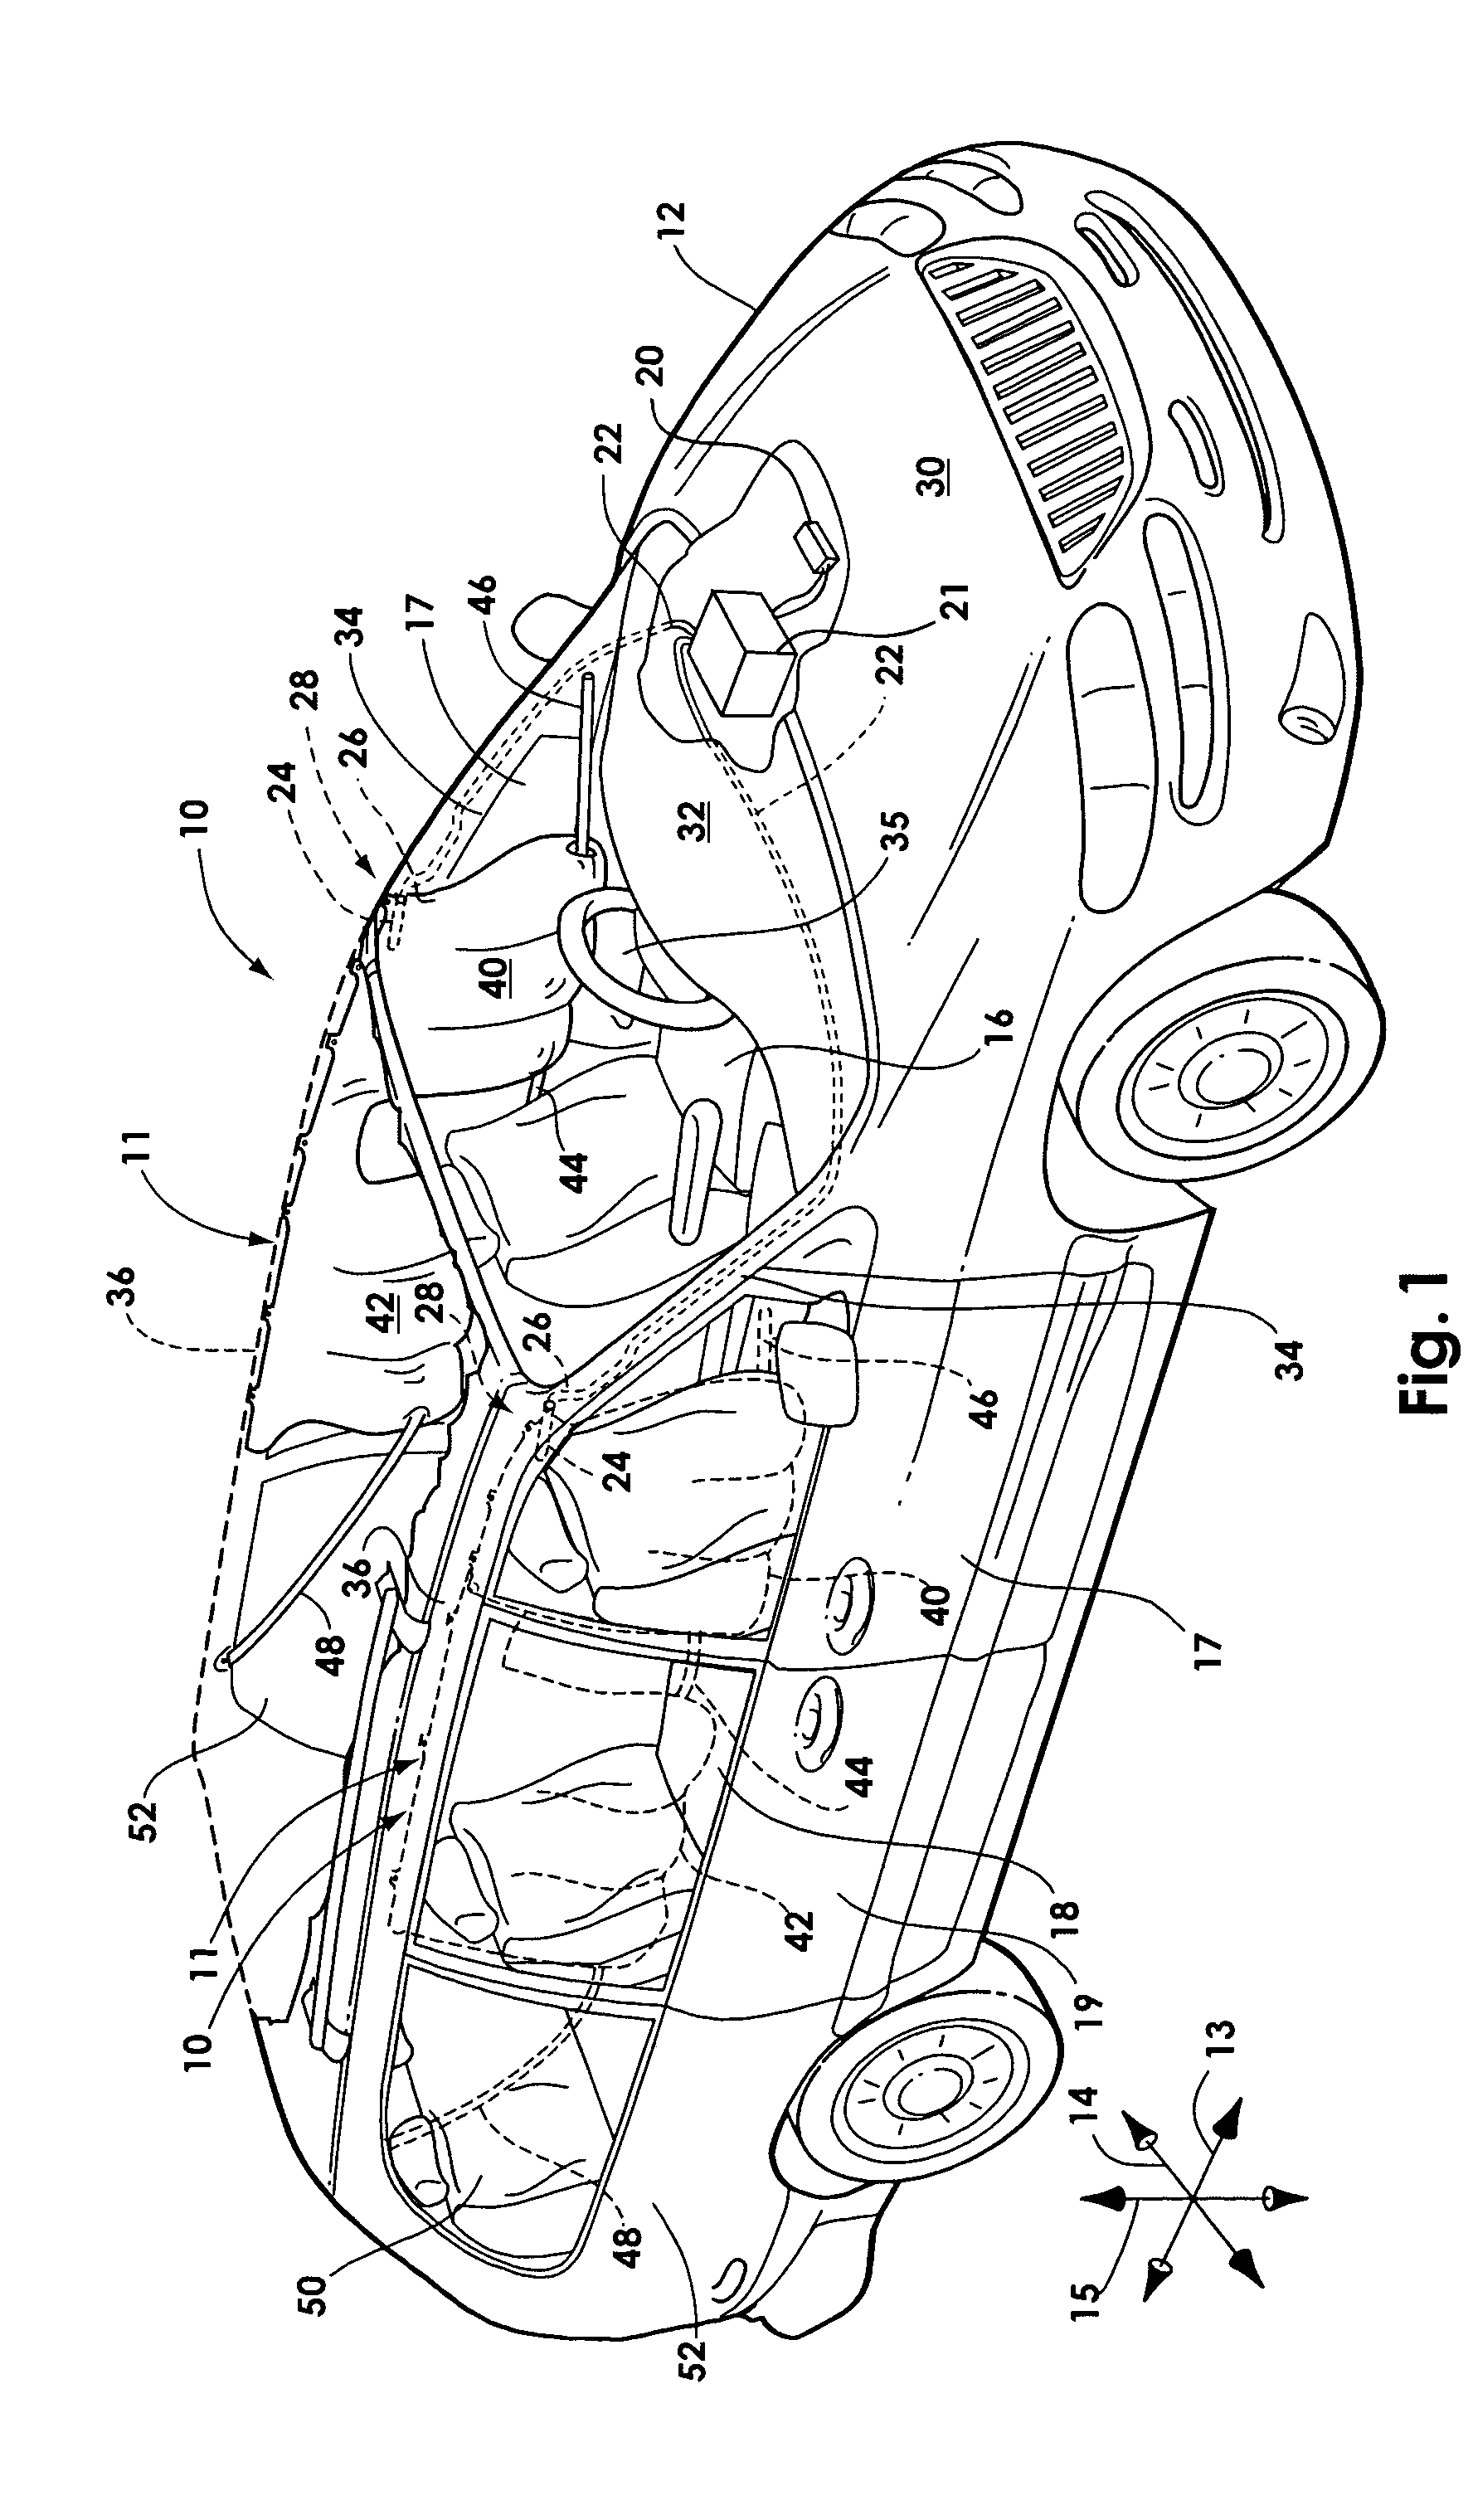 Electrical connection apparatus and method for an airbag inflator